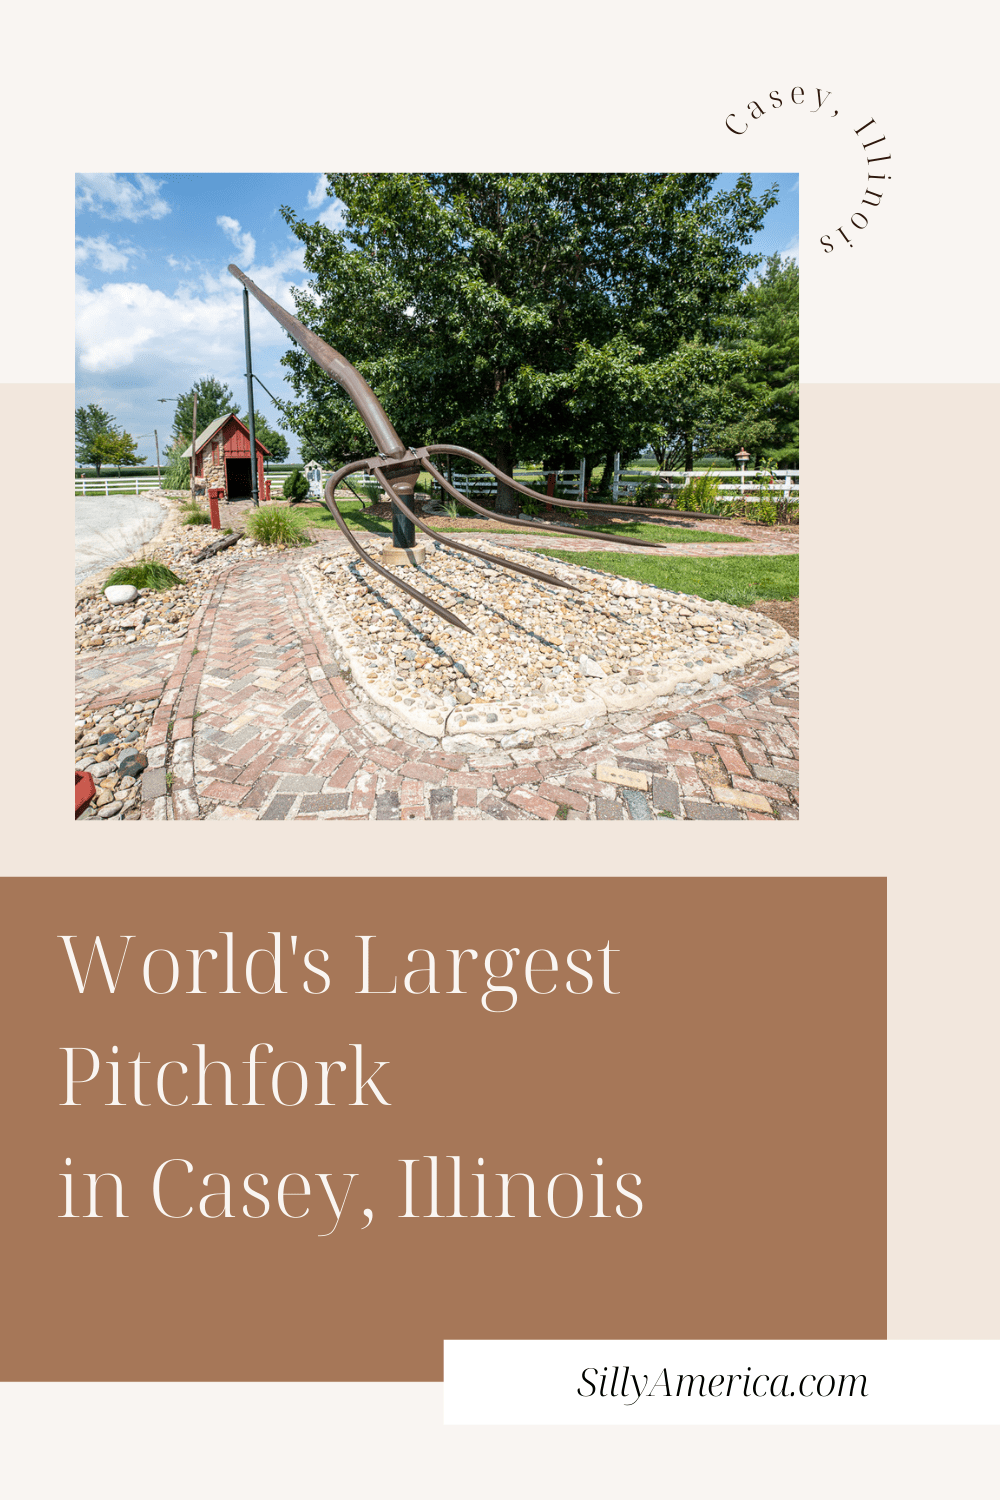 This Illinois roadside attraction is pitch perfect. It’s the World's Largest Pitchfork in Casey, Illinois: a small town with big things. Visit this world's largest thing your Illinois road trip or weekend getaway.  #IllinoisRoadsideAttractions #IllinoisRoadsideAttraction #RoadsideAttractions #RoadsideAttraction #RoadTrip #IllinoisRoadTrip #IllinoisWeekendGetaways #IllinoisWithKids #WorldsLargestThings